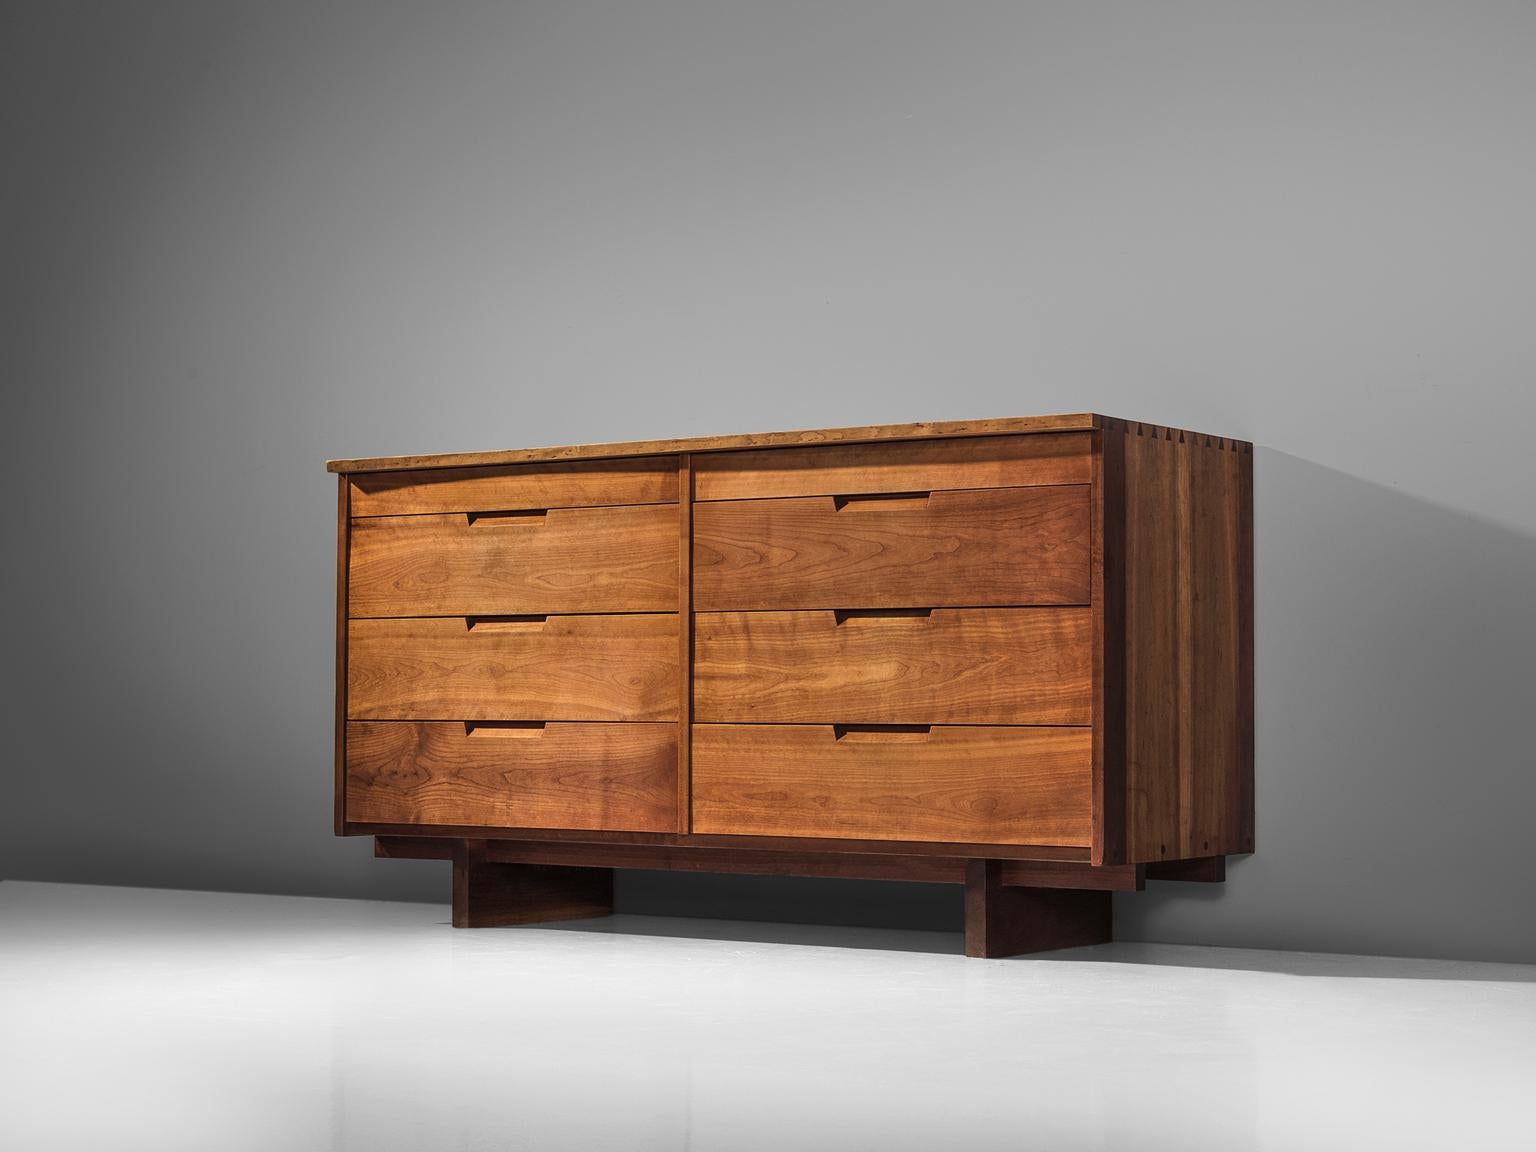 George Nakashima, cabinet in cherry, New Hope, PA, 1960s - 1970s.

This cabinet features eight drawers, executed in cherry with traditional and finished with archetypical dovetail Nakashima wood-joints. The cabinet rests on two slabs of solid